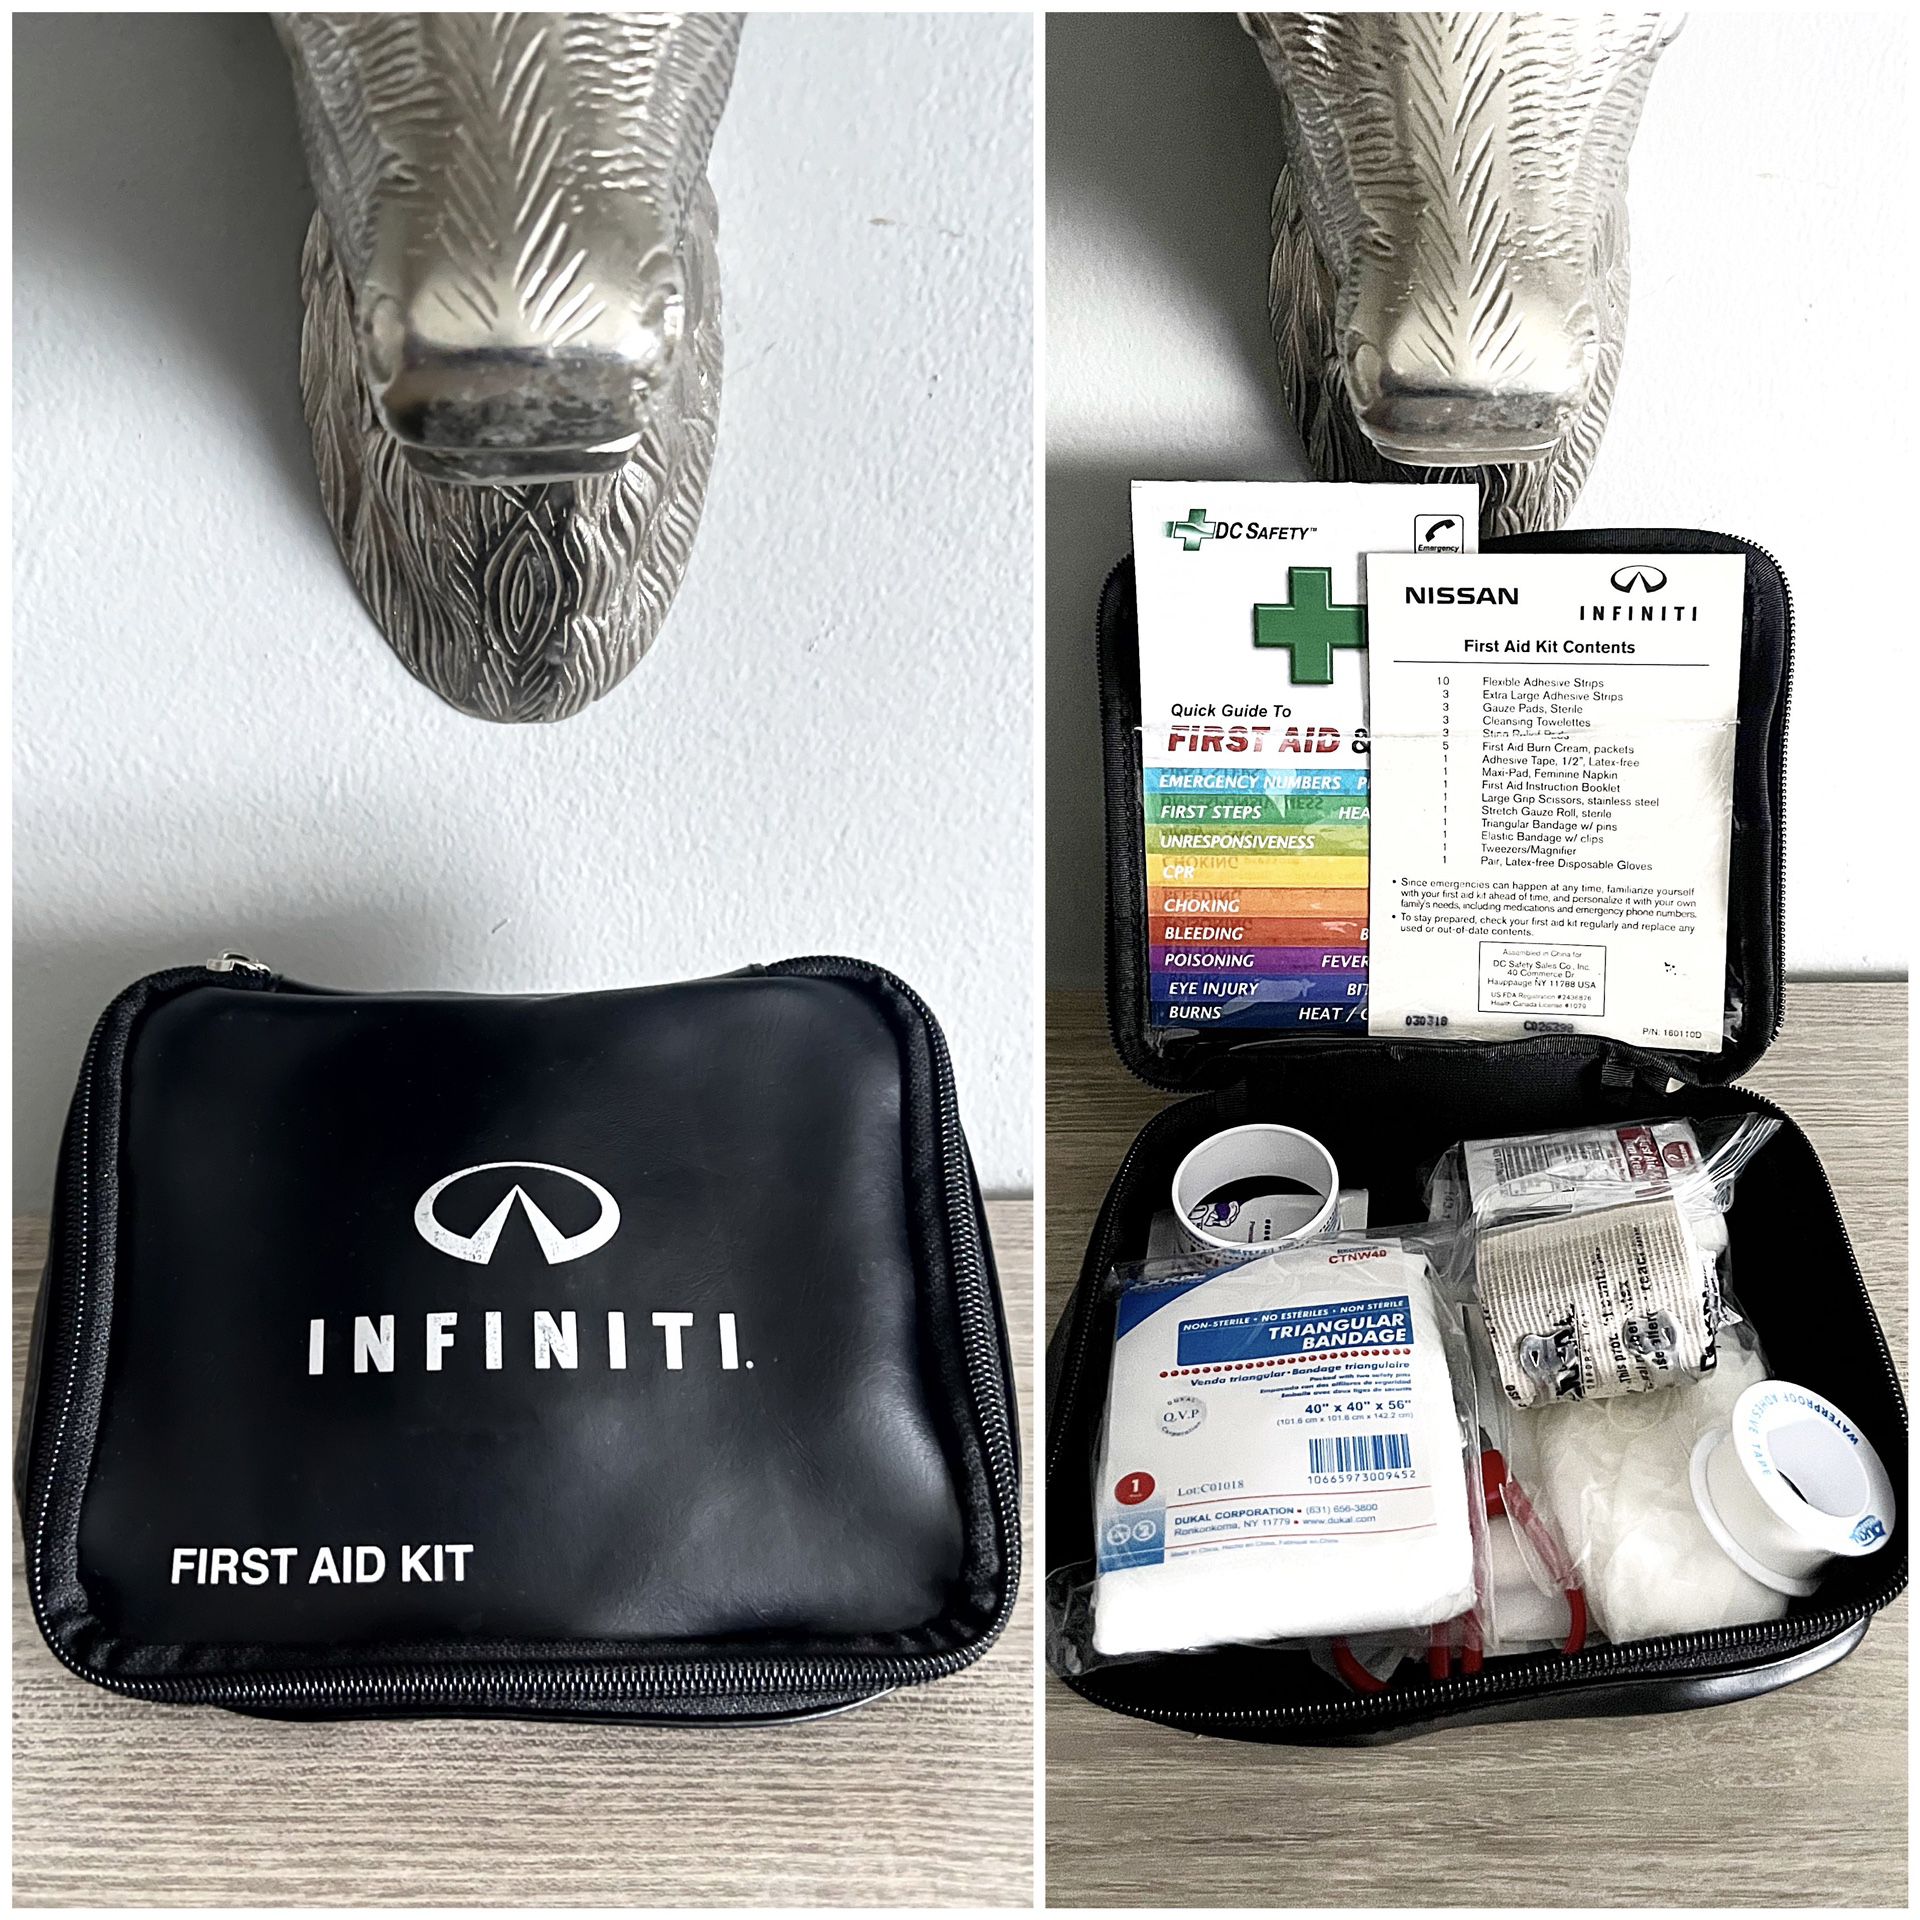 First Aid emergency Kit bag. Please see the pictures for what’s included.